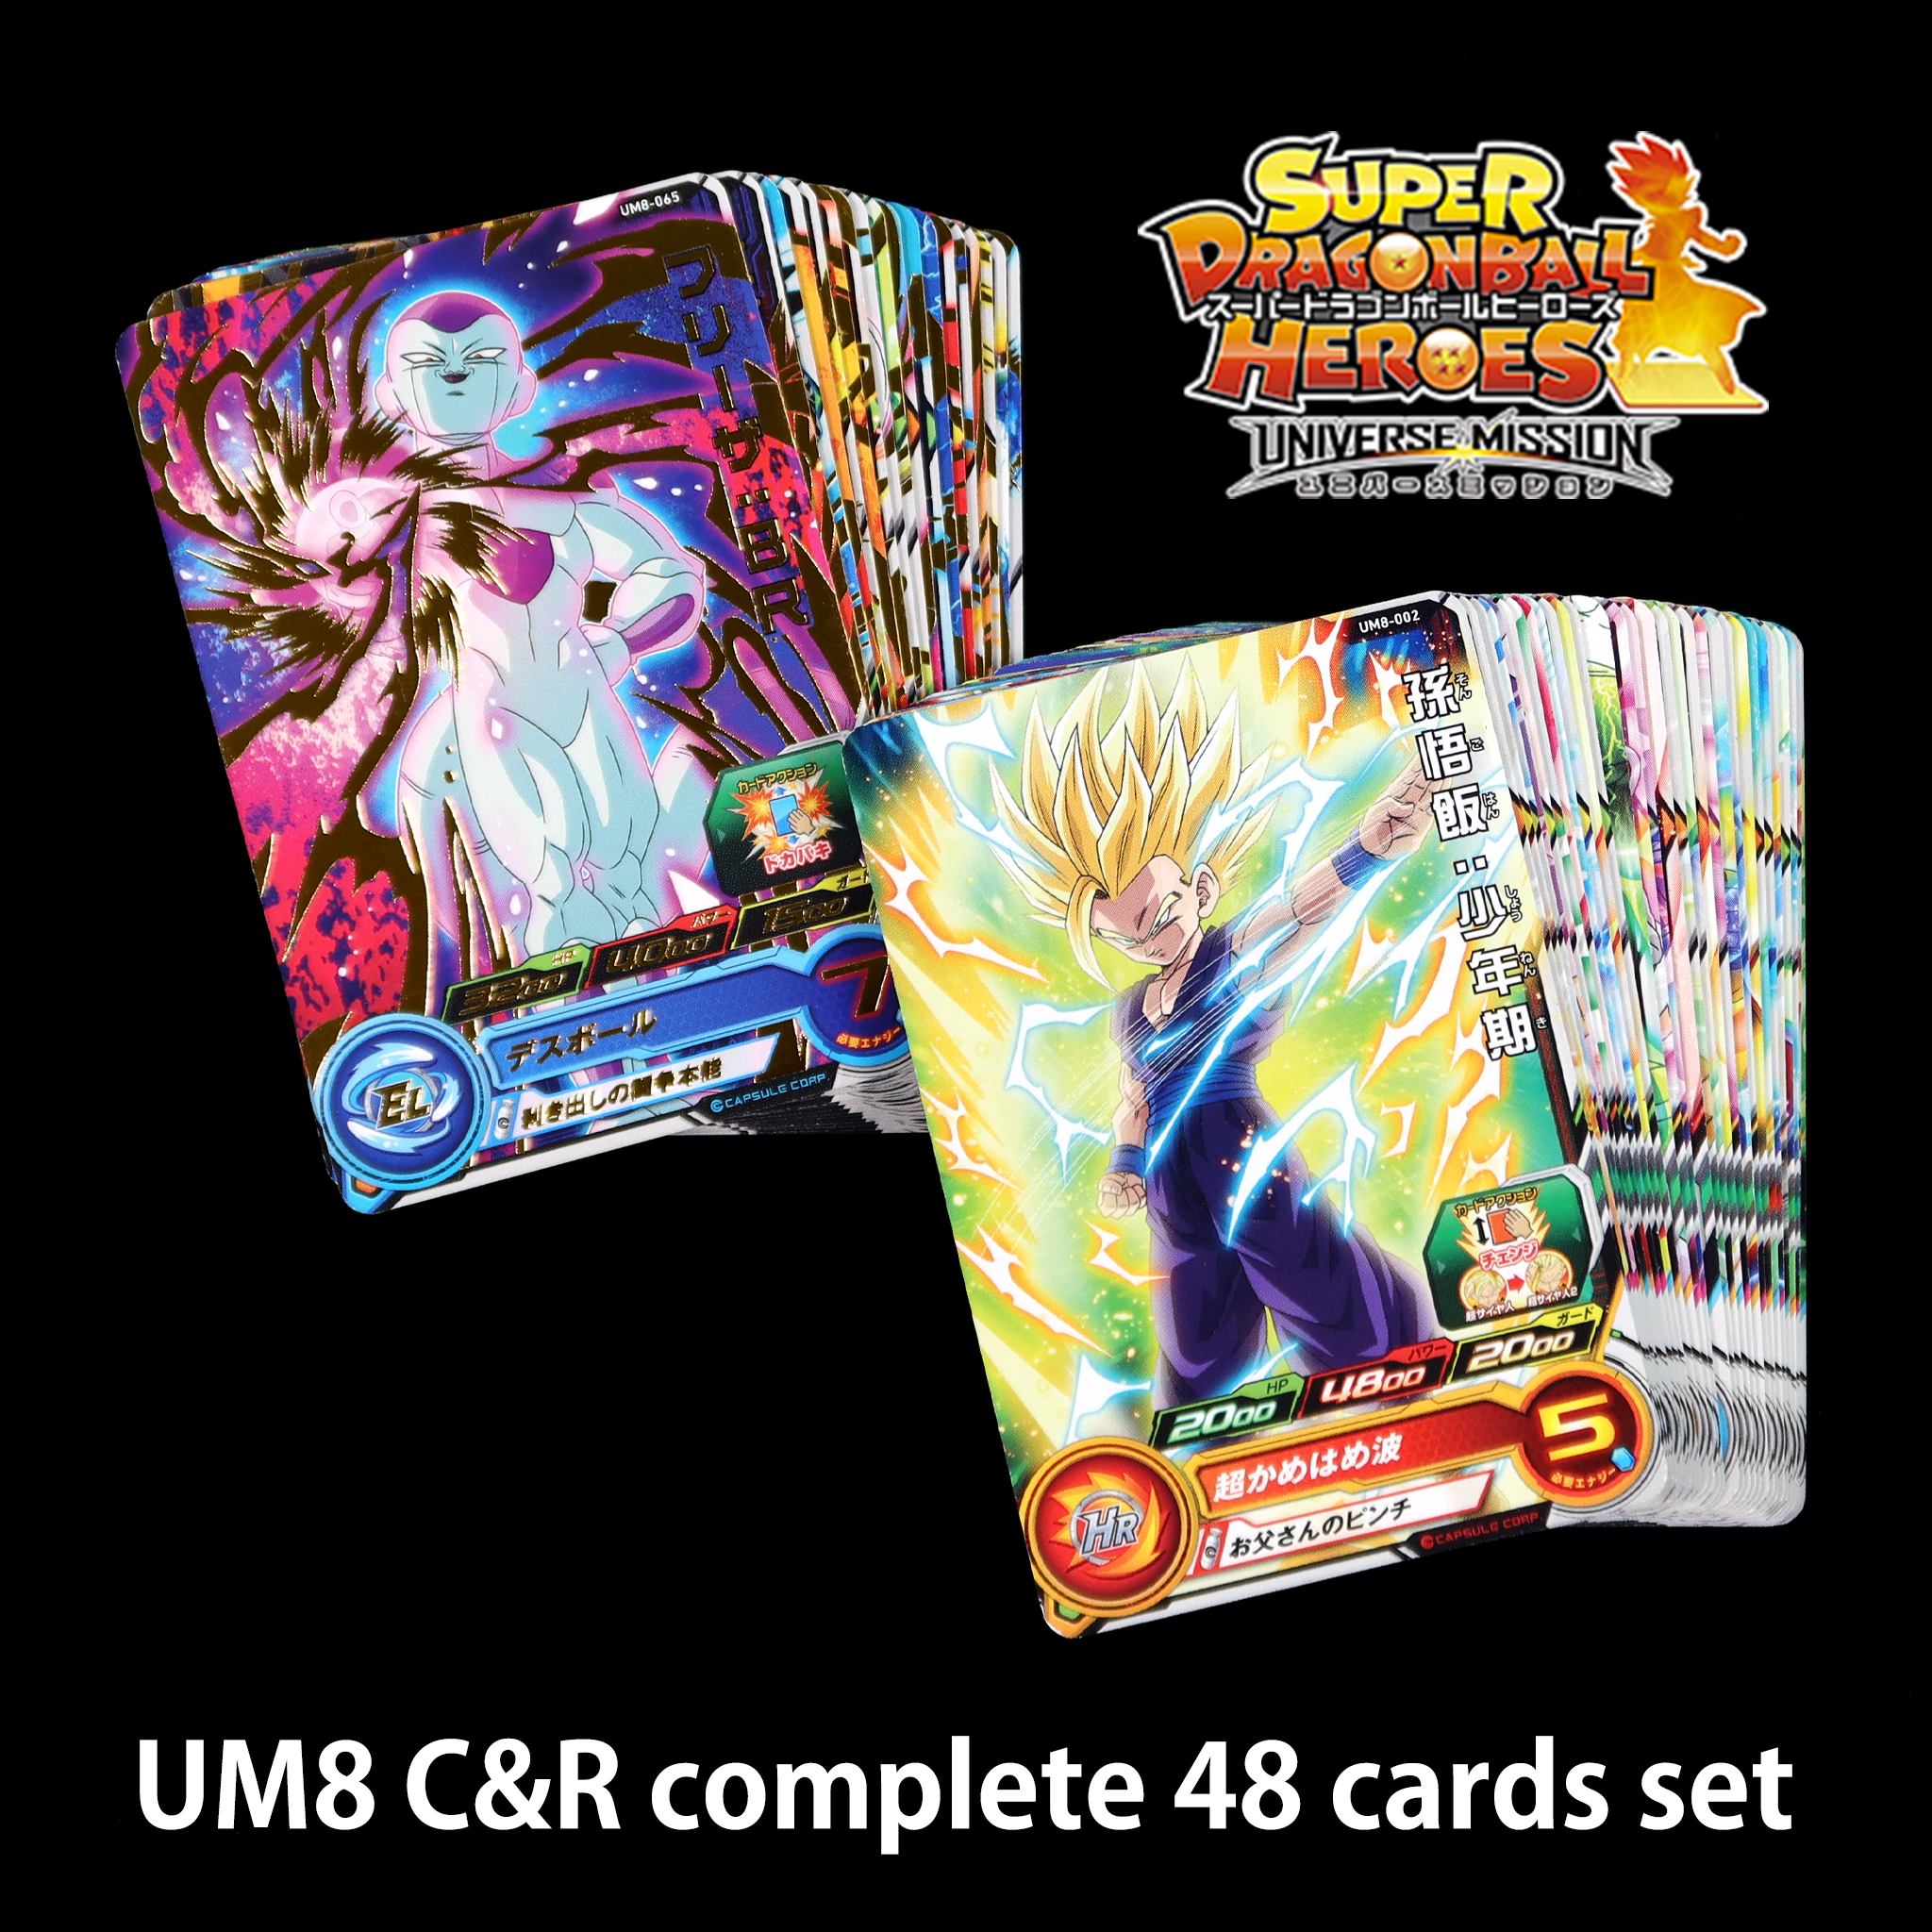 SUPER DRAGON BALL HEROES UNIVERSE MISSION 8 C&R complete 48 cards set      30 Common cards     18 Rare cards